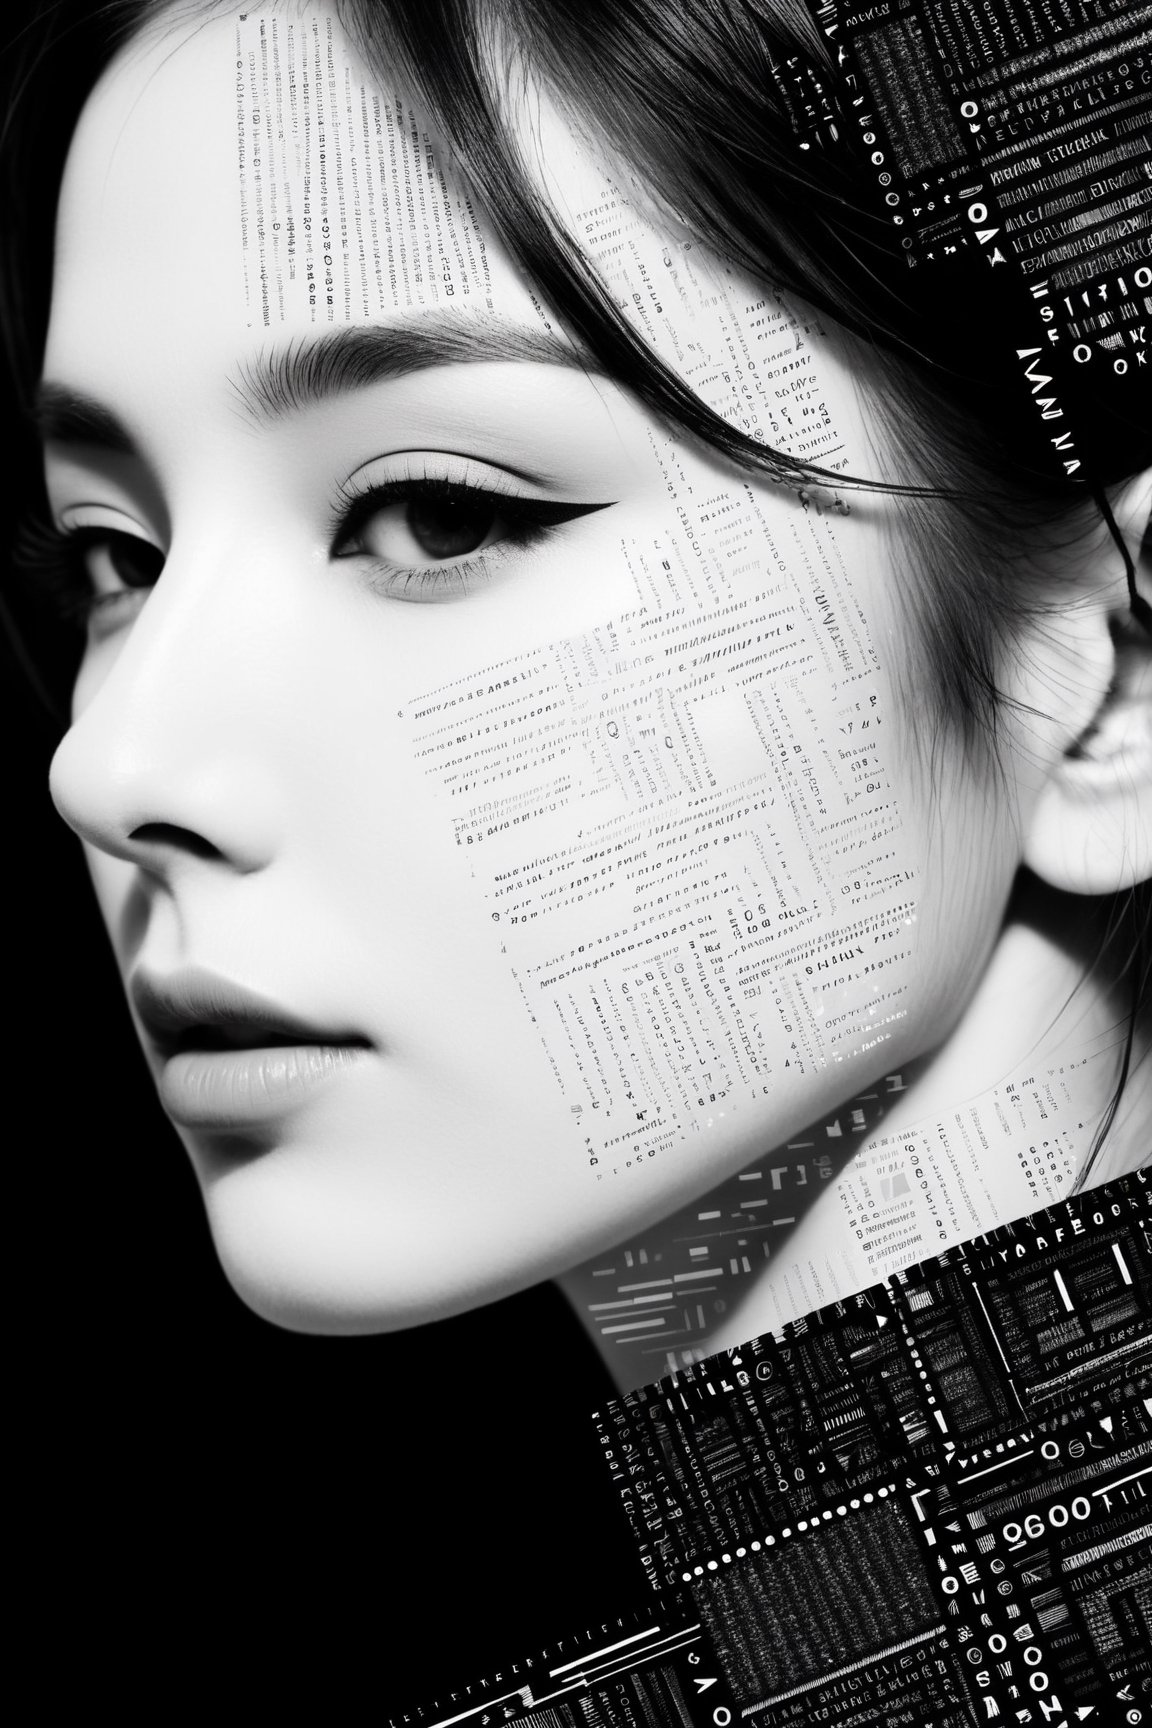 1girl,portrait composed of typographical elements,ASCII art aesthetic,monochrome,intricate details,creative use of letter shapes and negative space,high contrast,post-digital,